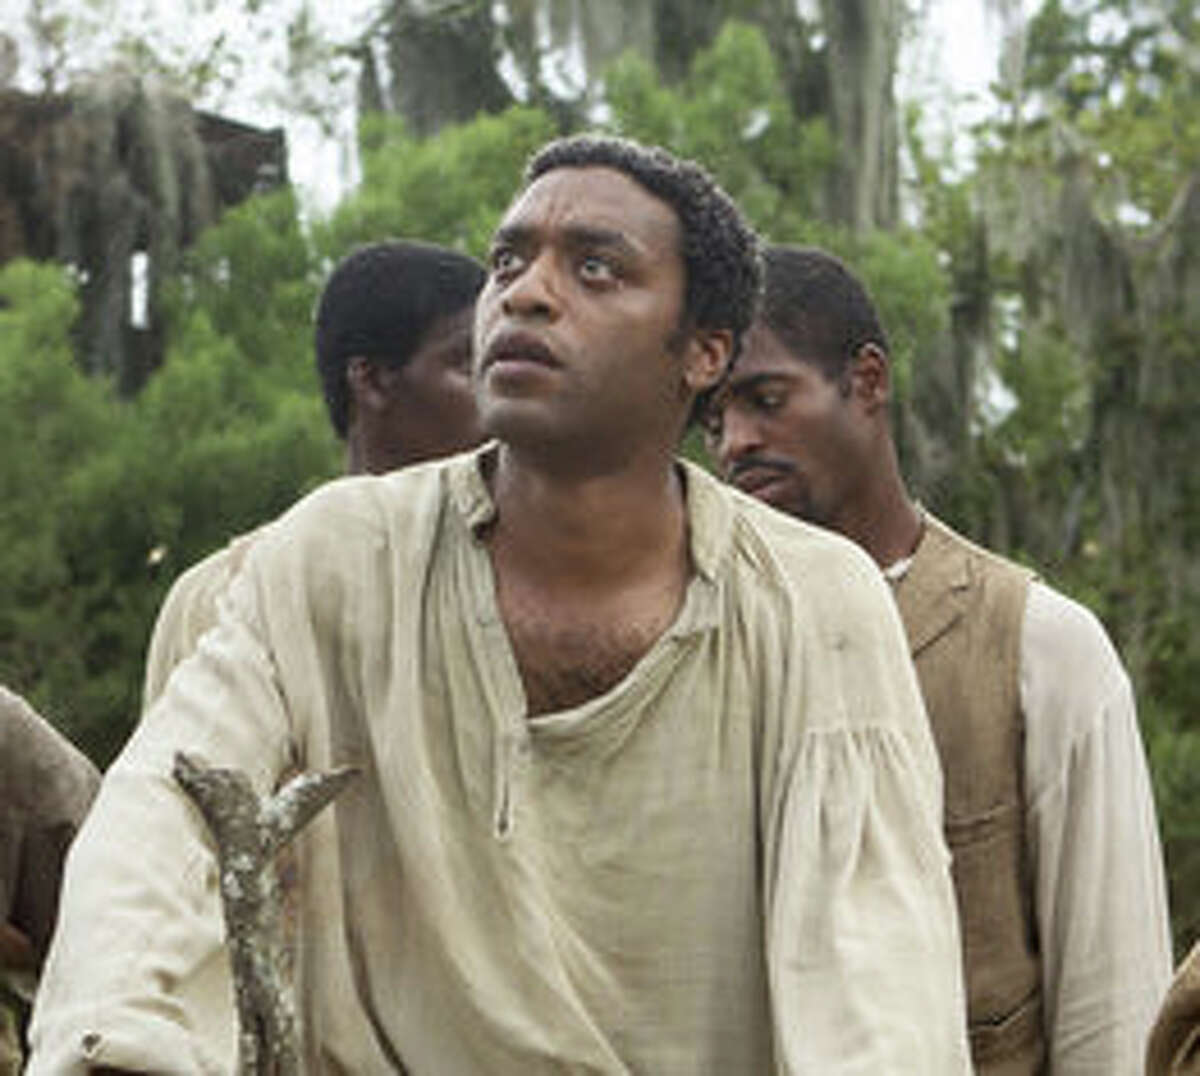 "The Oscar-winning film, "12 Years a Slave," will be shown at the Westport Public Library on May 31.